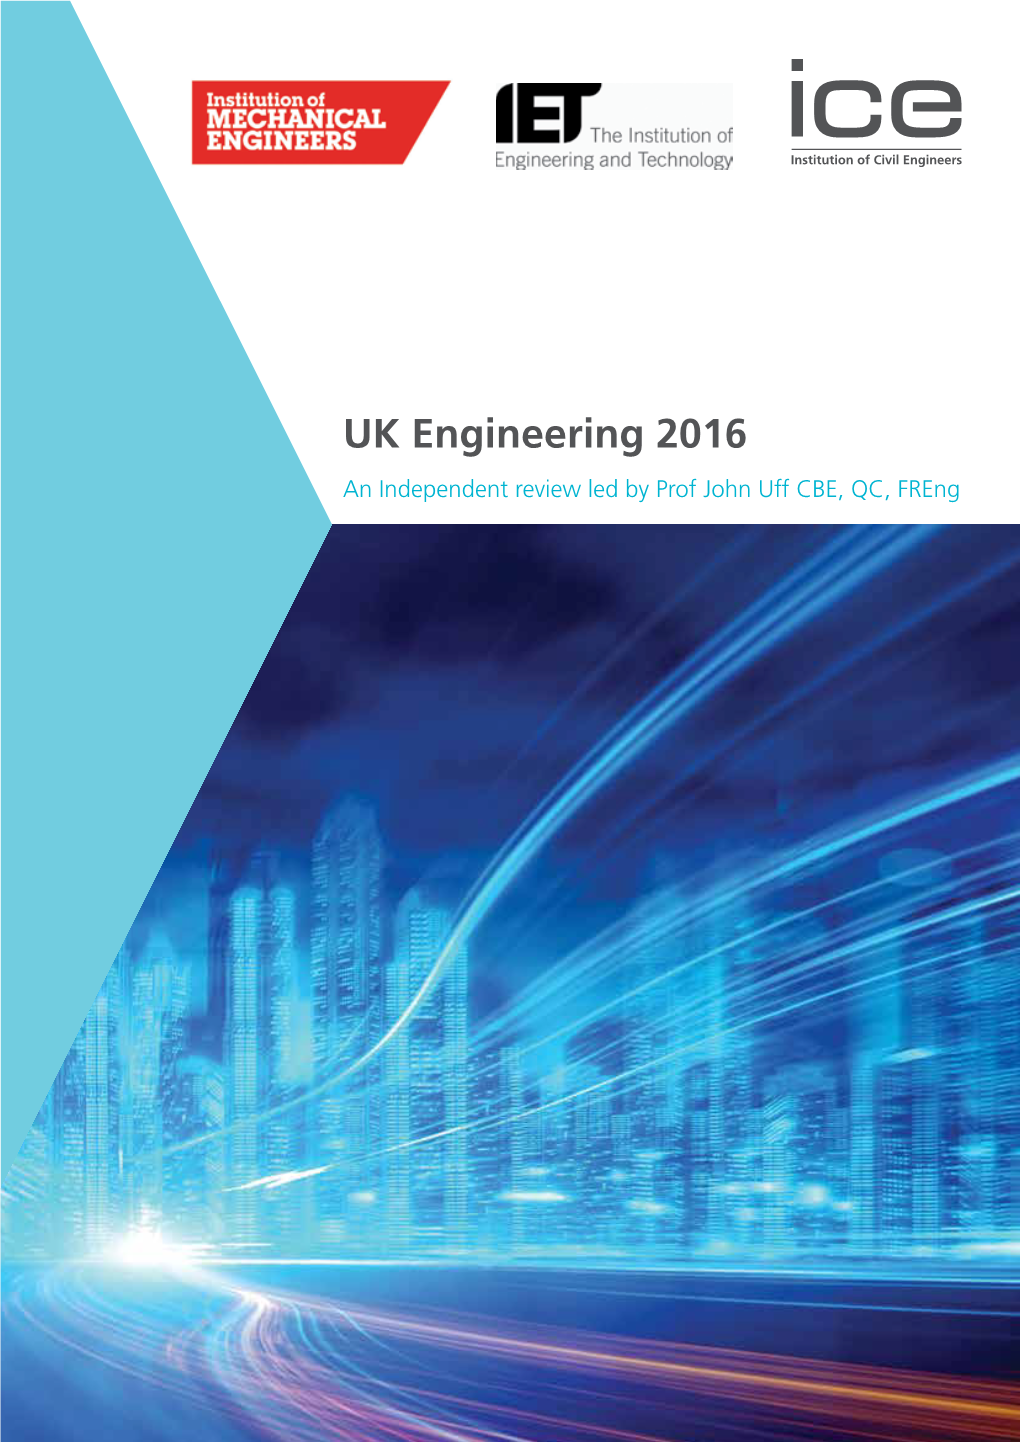 UK Engineering 2016 an Independent Review Led by Prof John Uff CBE, QC, Freng